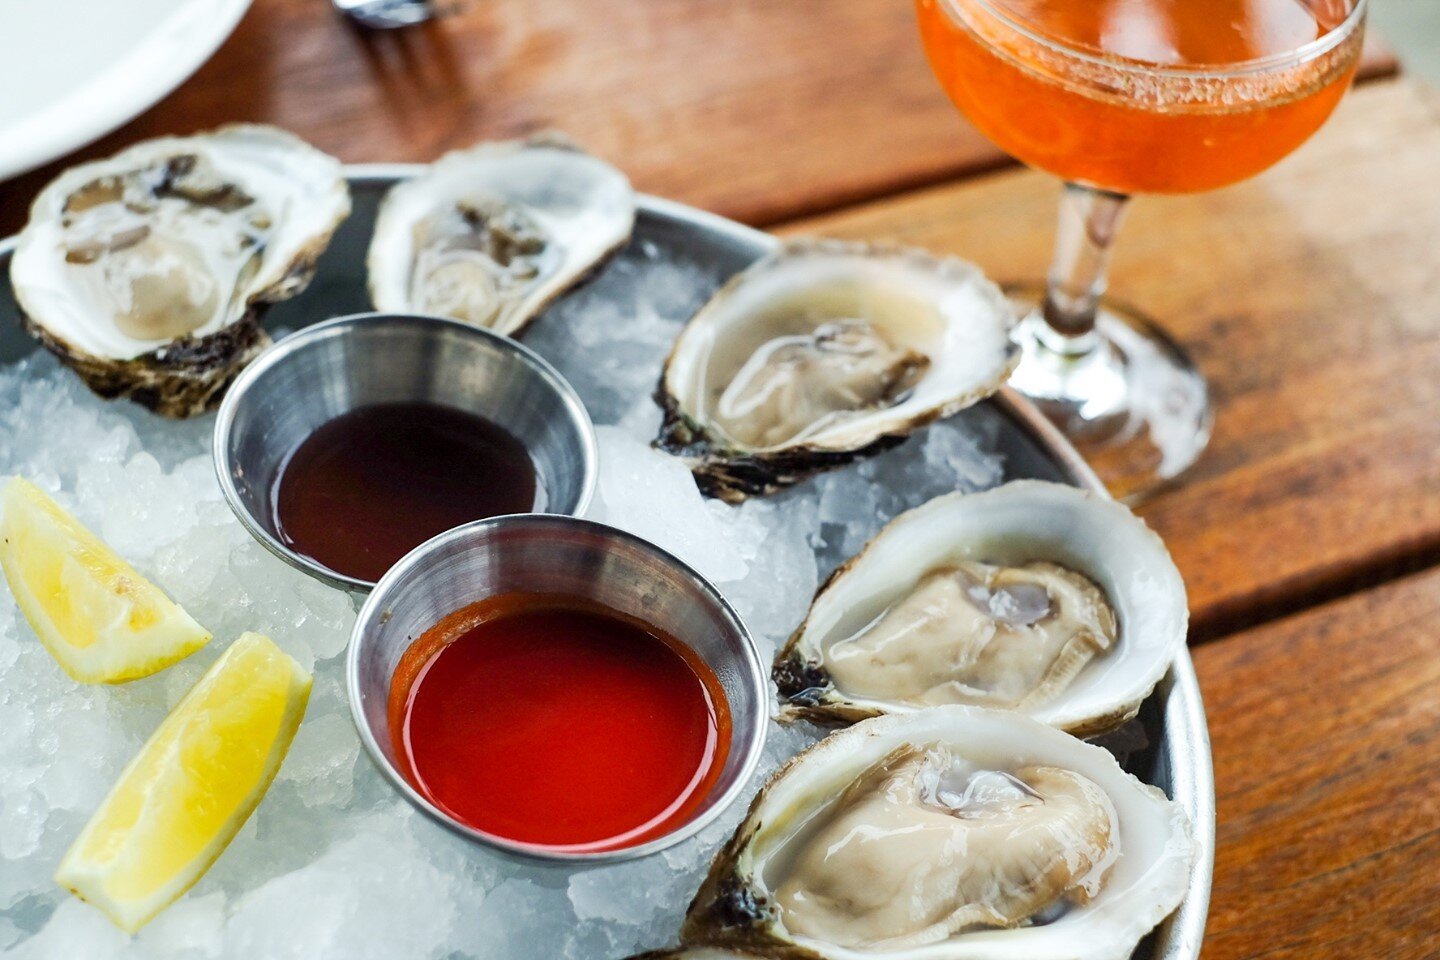 That Friday feeling is real. Feed it oysters and bubbles here at KQ - rain or shine!